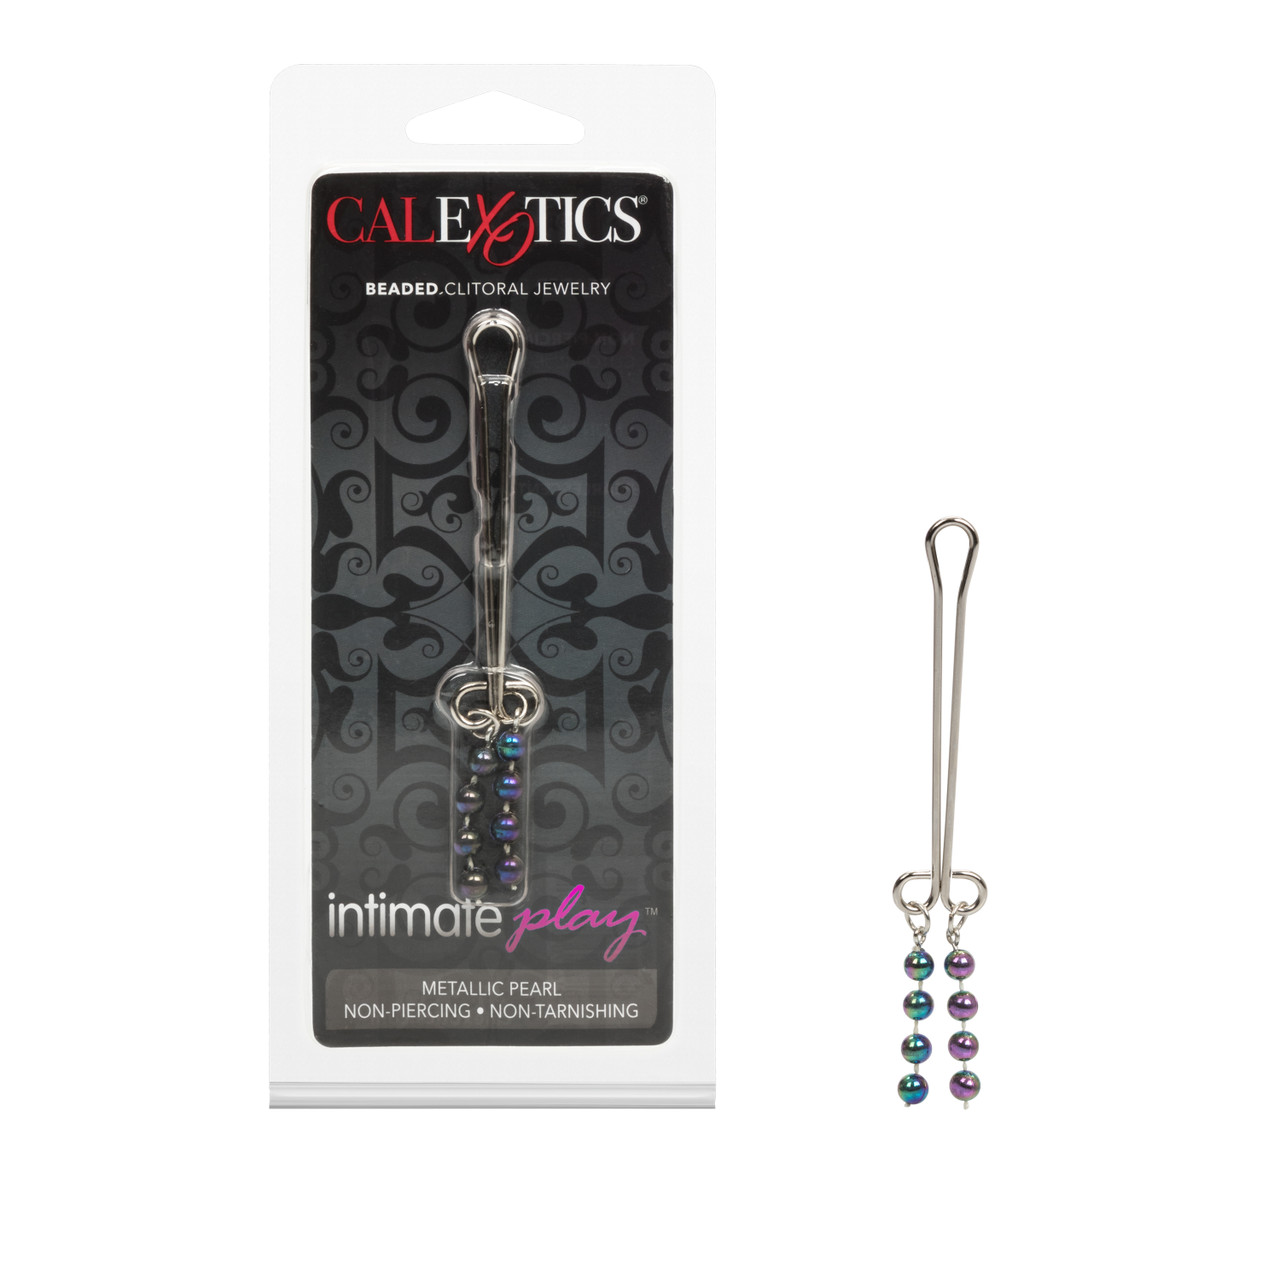 chris sholar recommends non piercing clitoral jewelry pic